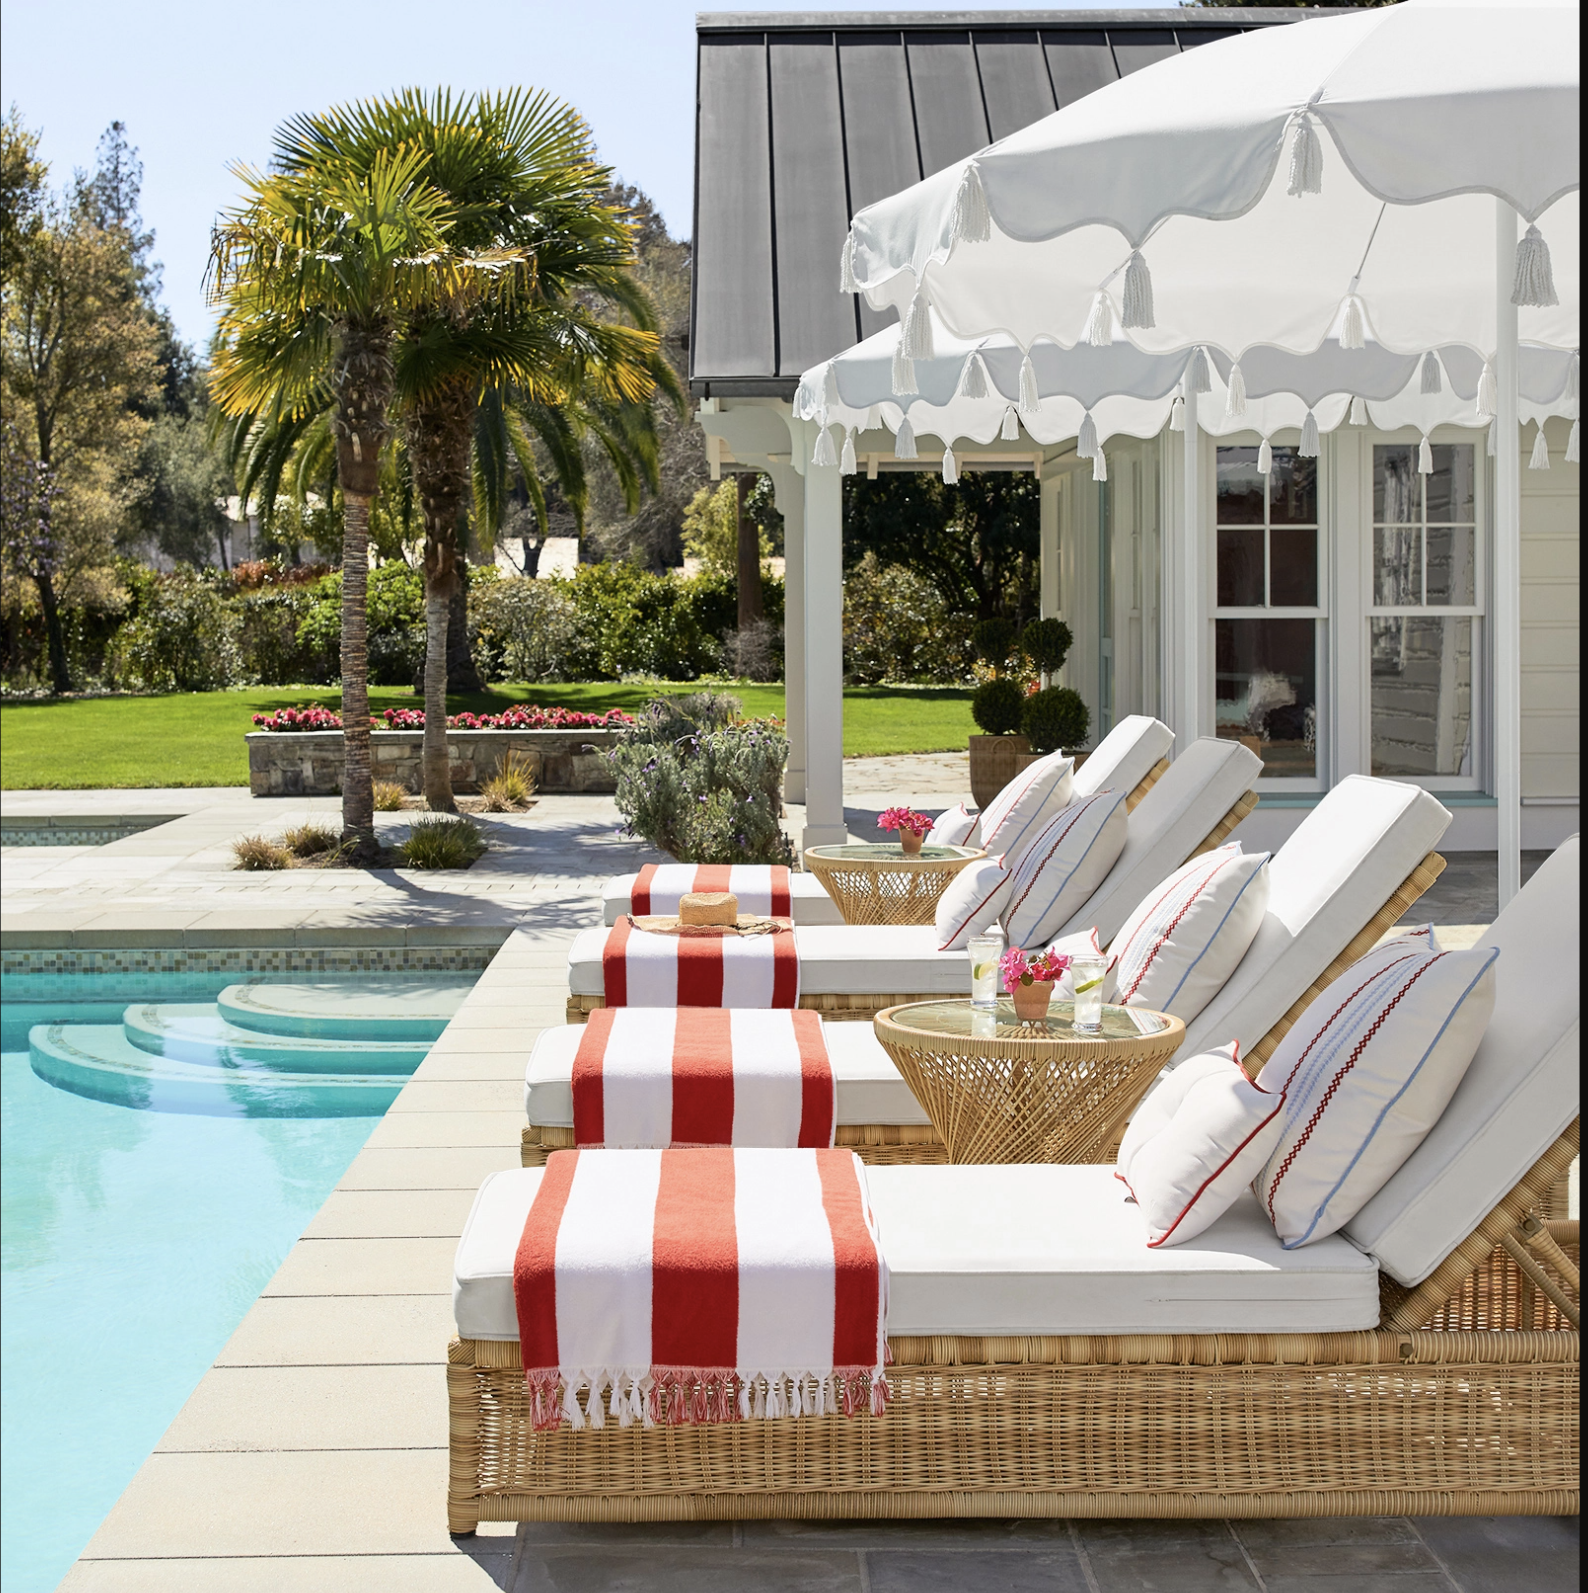 Need New Pool Lounge Chairs?! We've Got You Covered